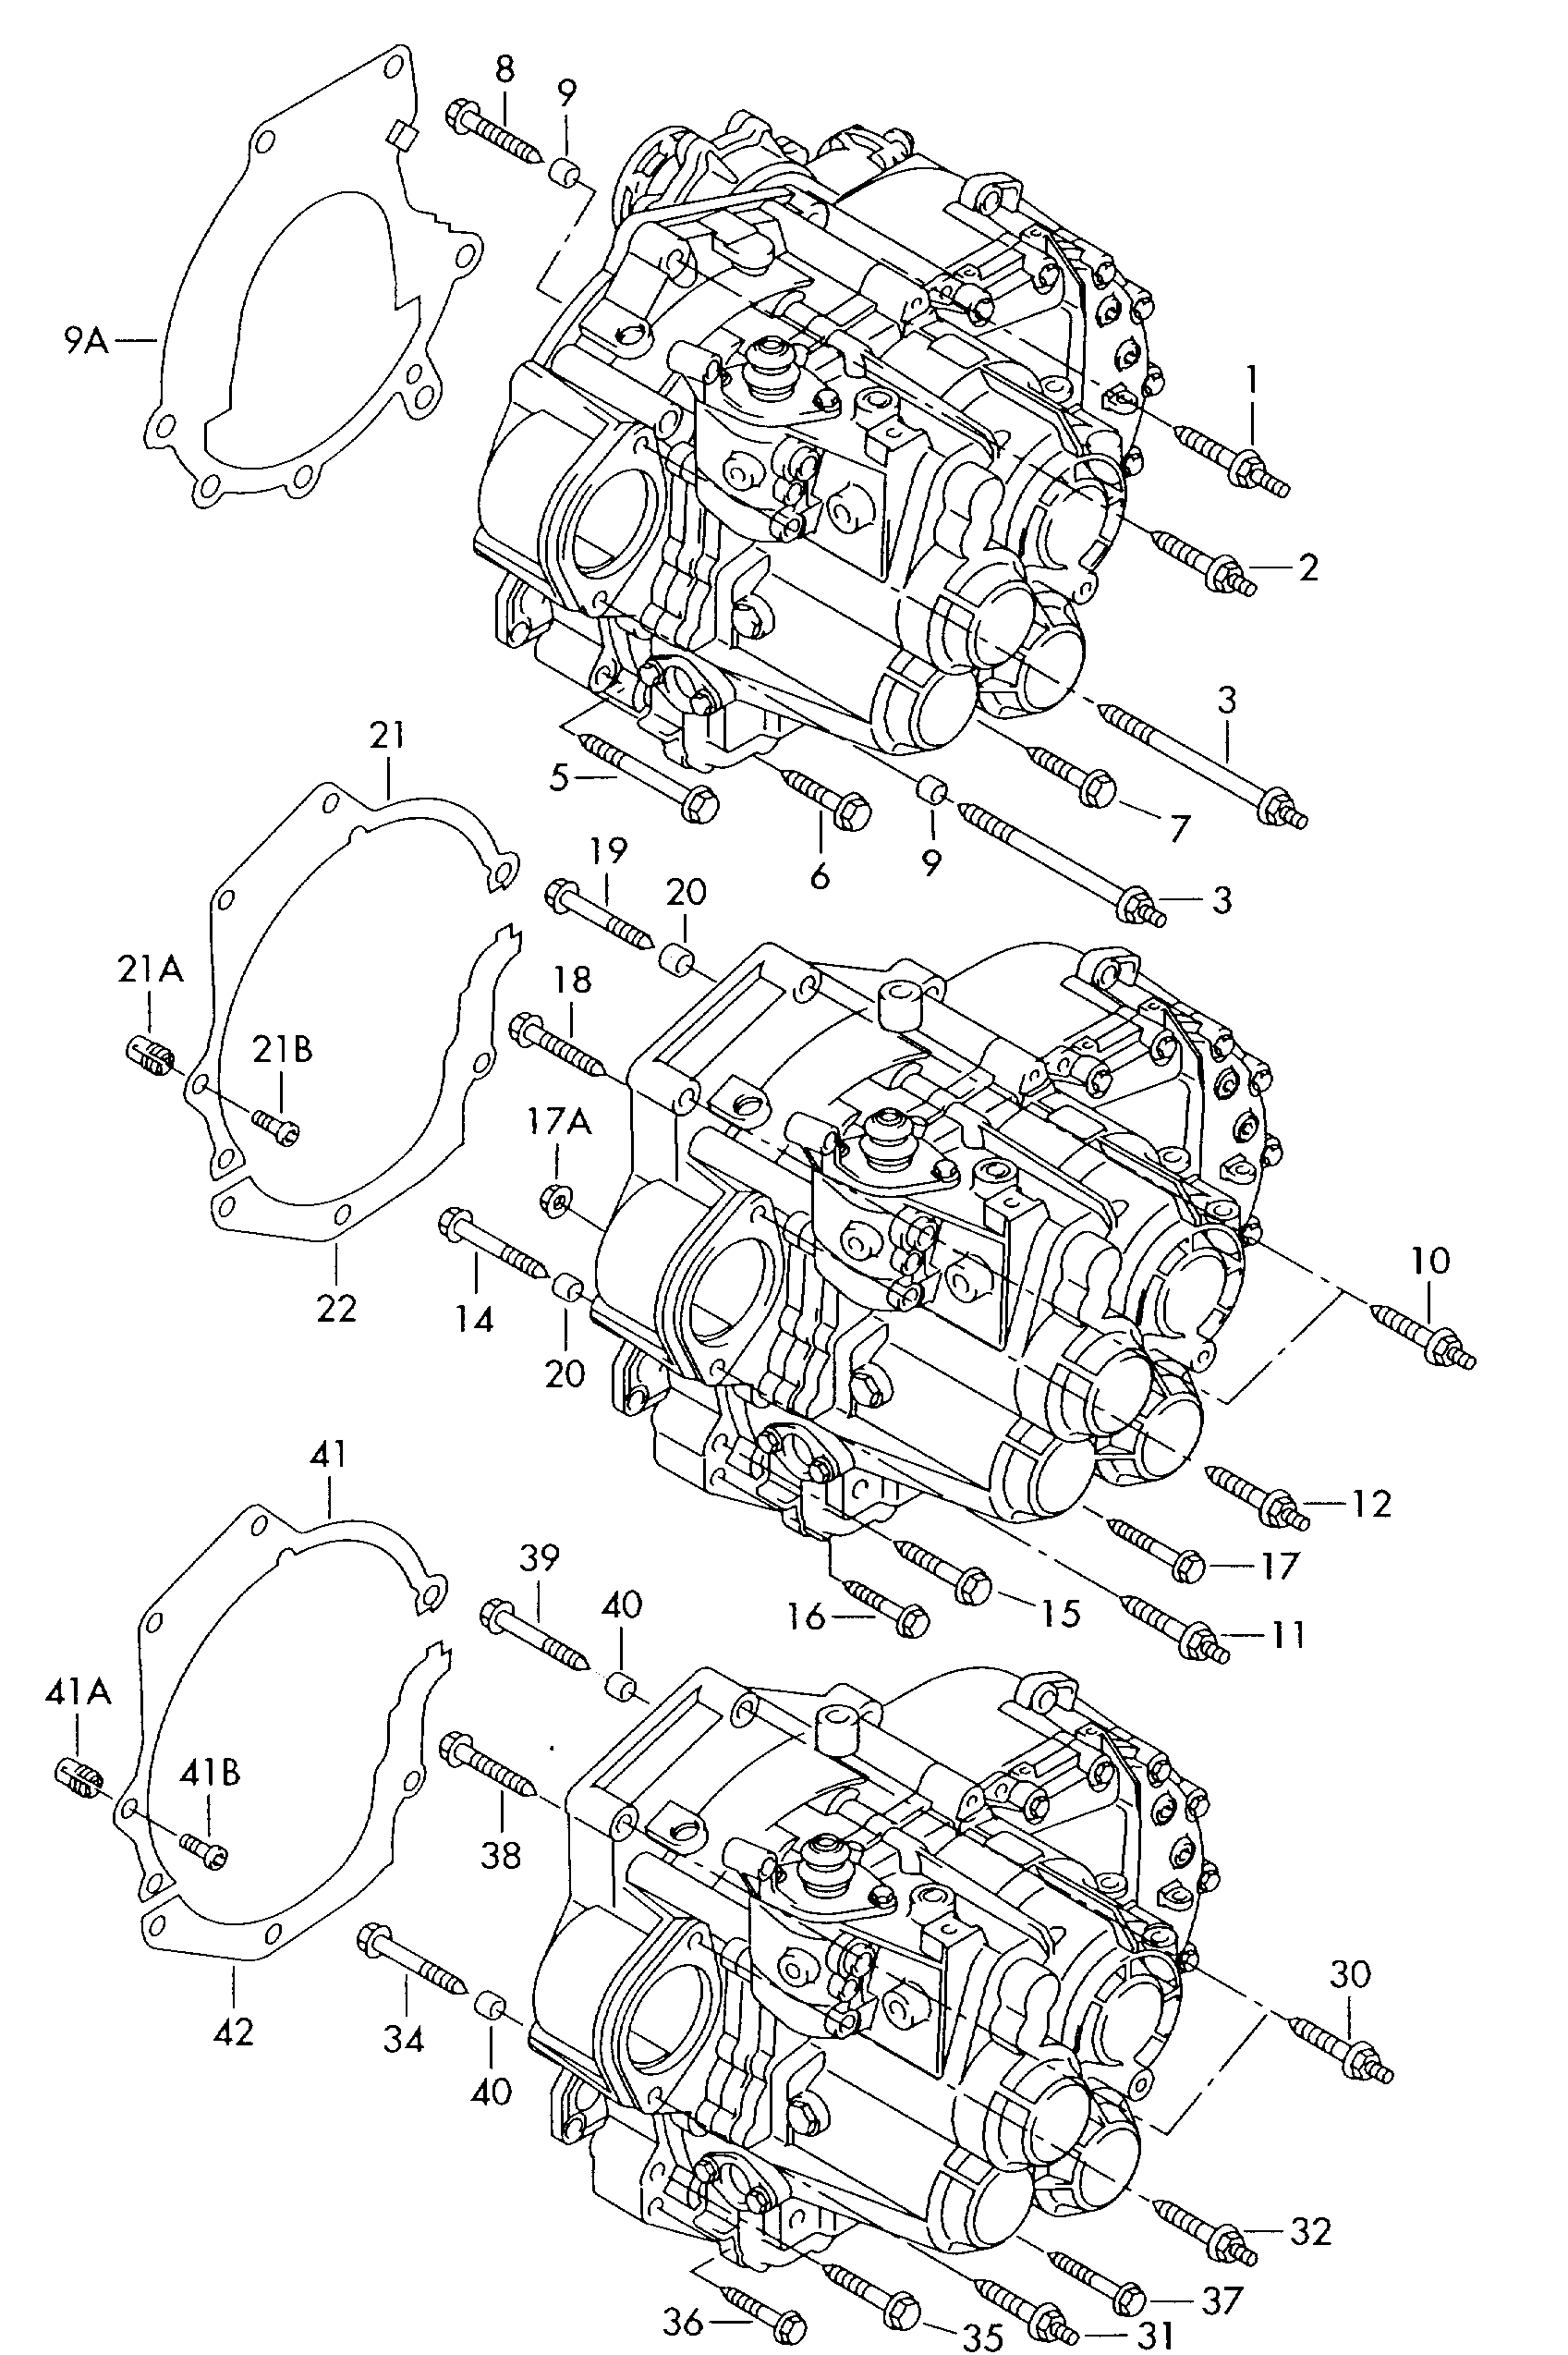 mounting parts for engine and<br>transmission6-speed manual transmissionfor four-wheel drive  - Yeti - yet